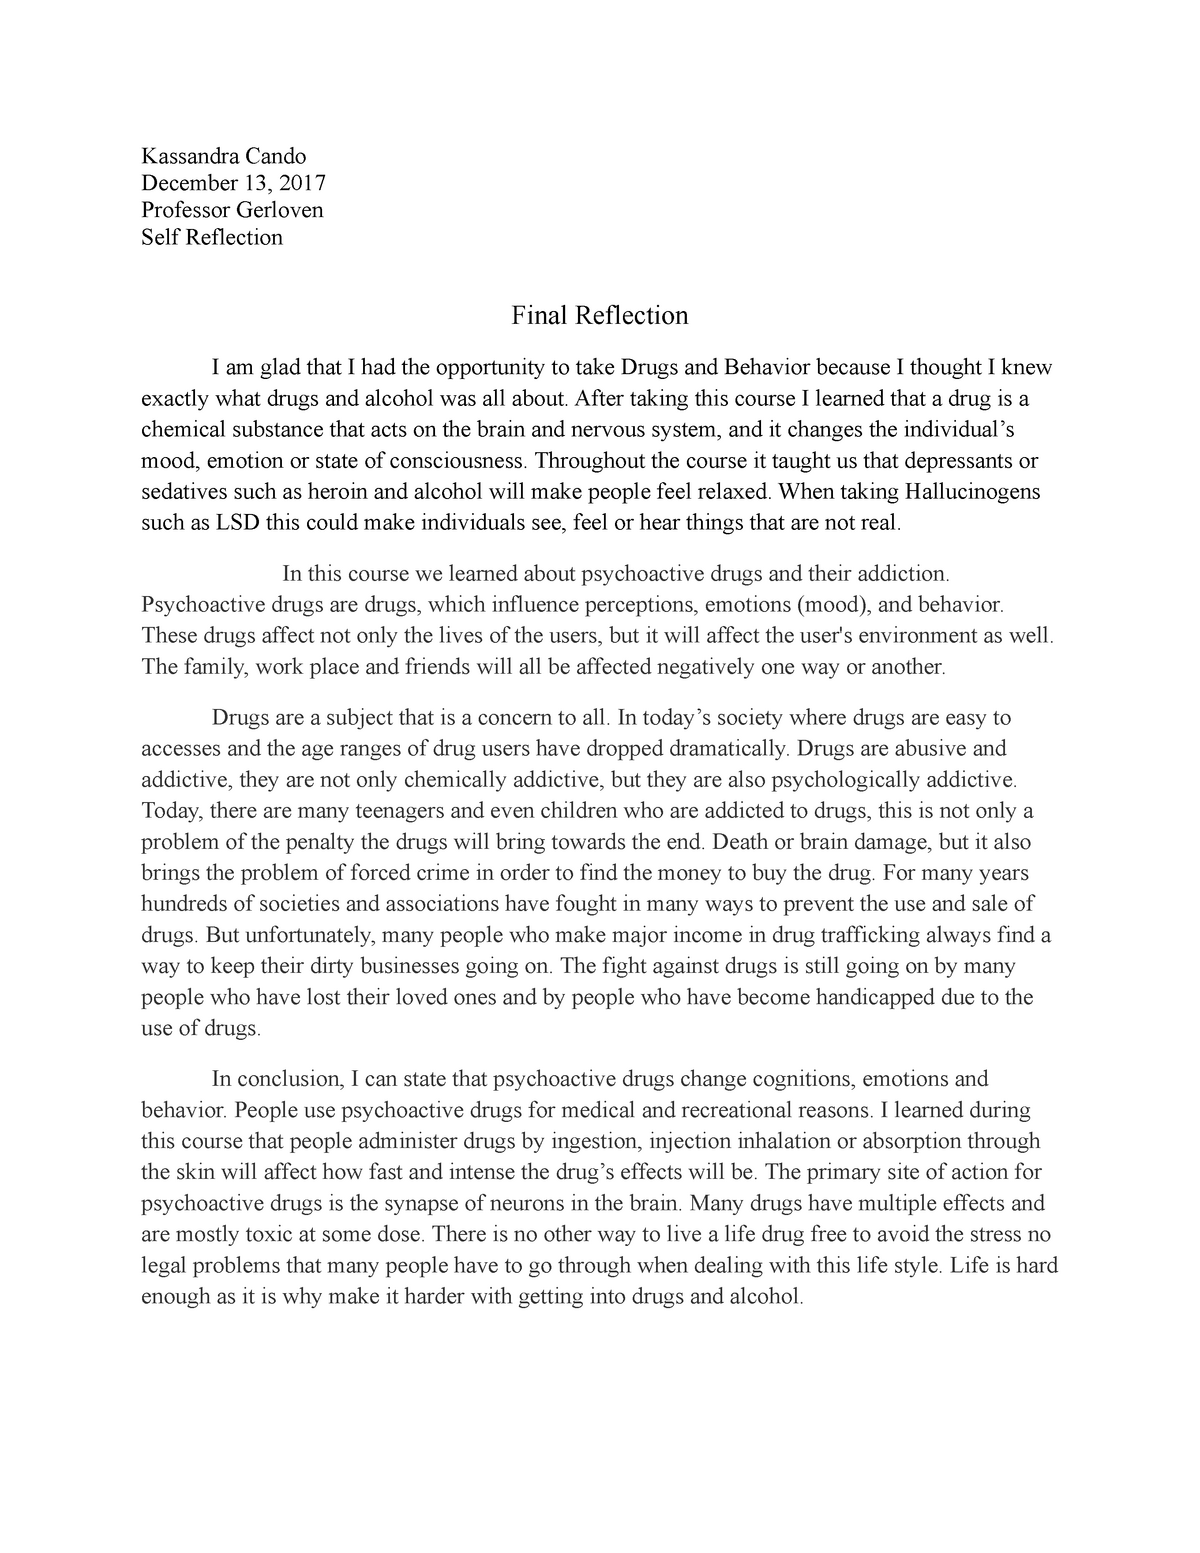 student reflection essay example